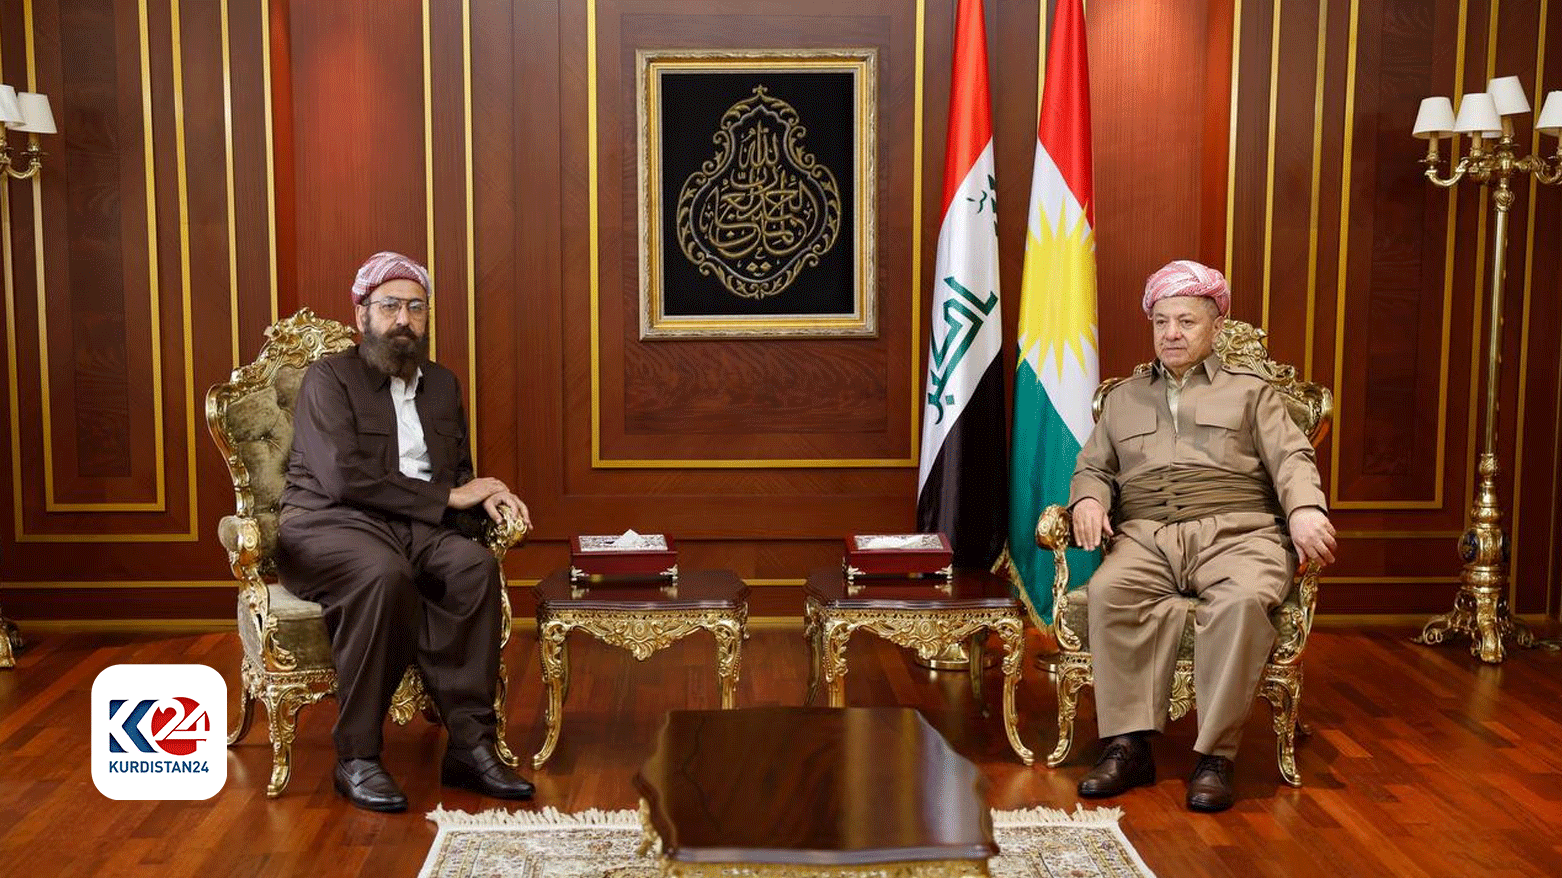 KDP President emphasized his commitment to supporting Yezidis